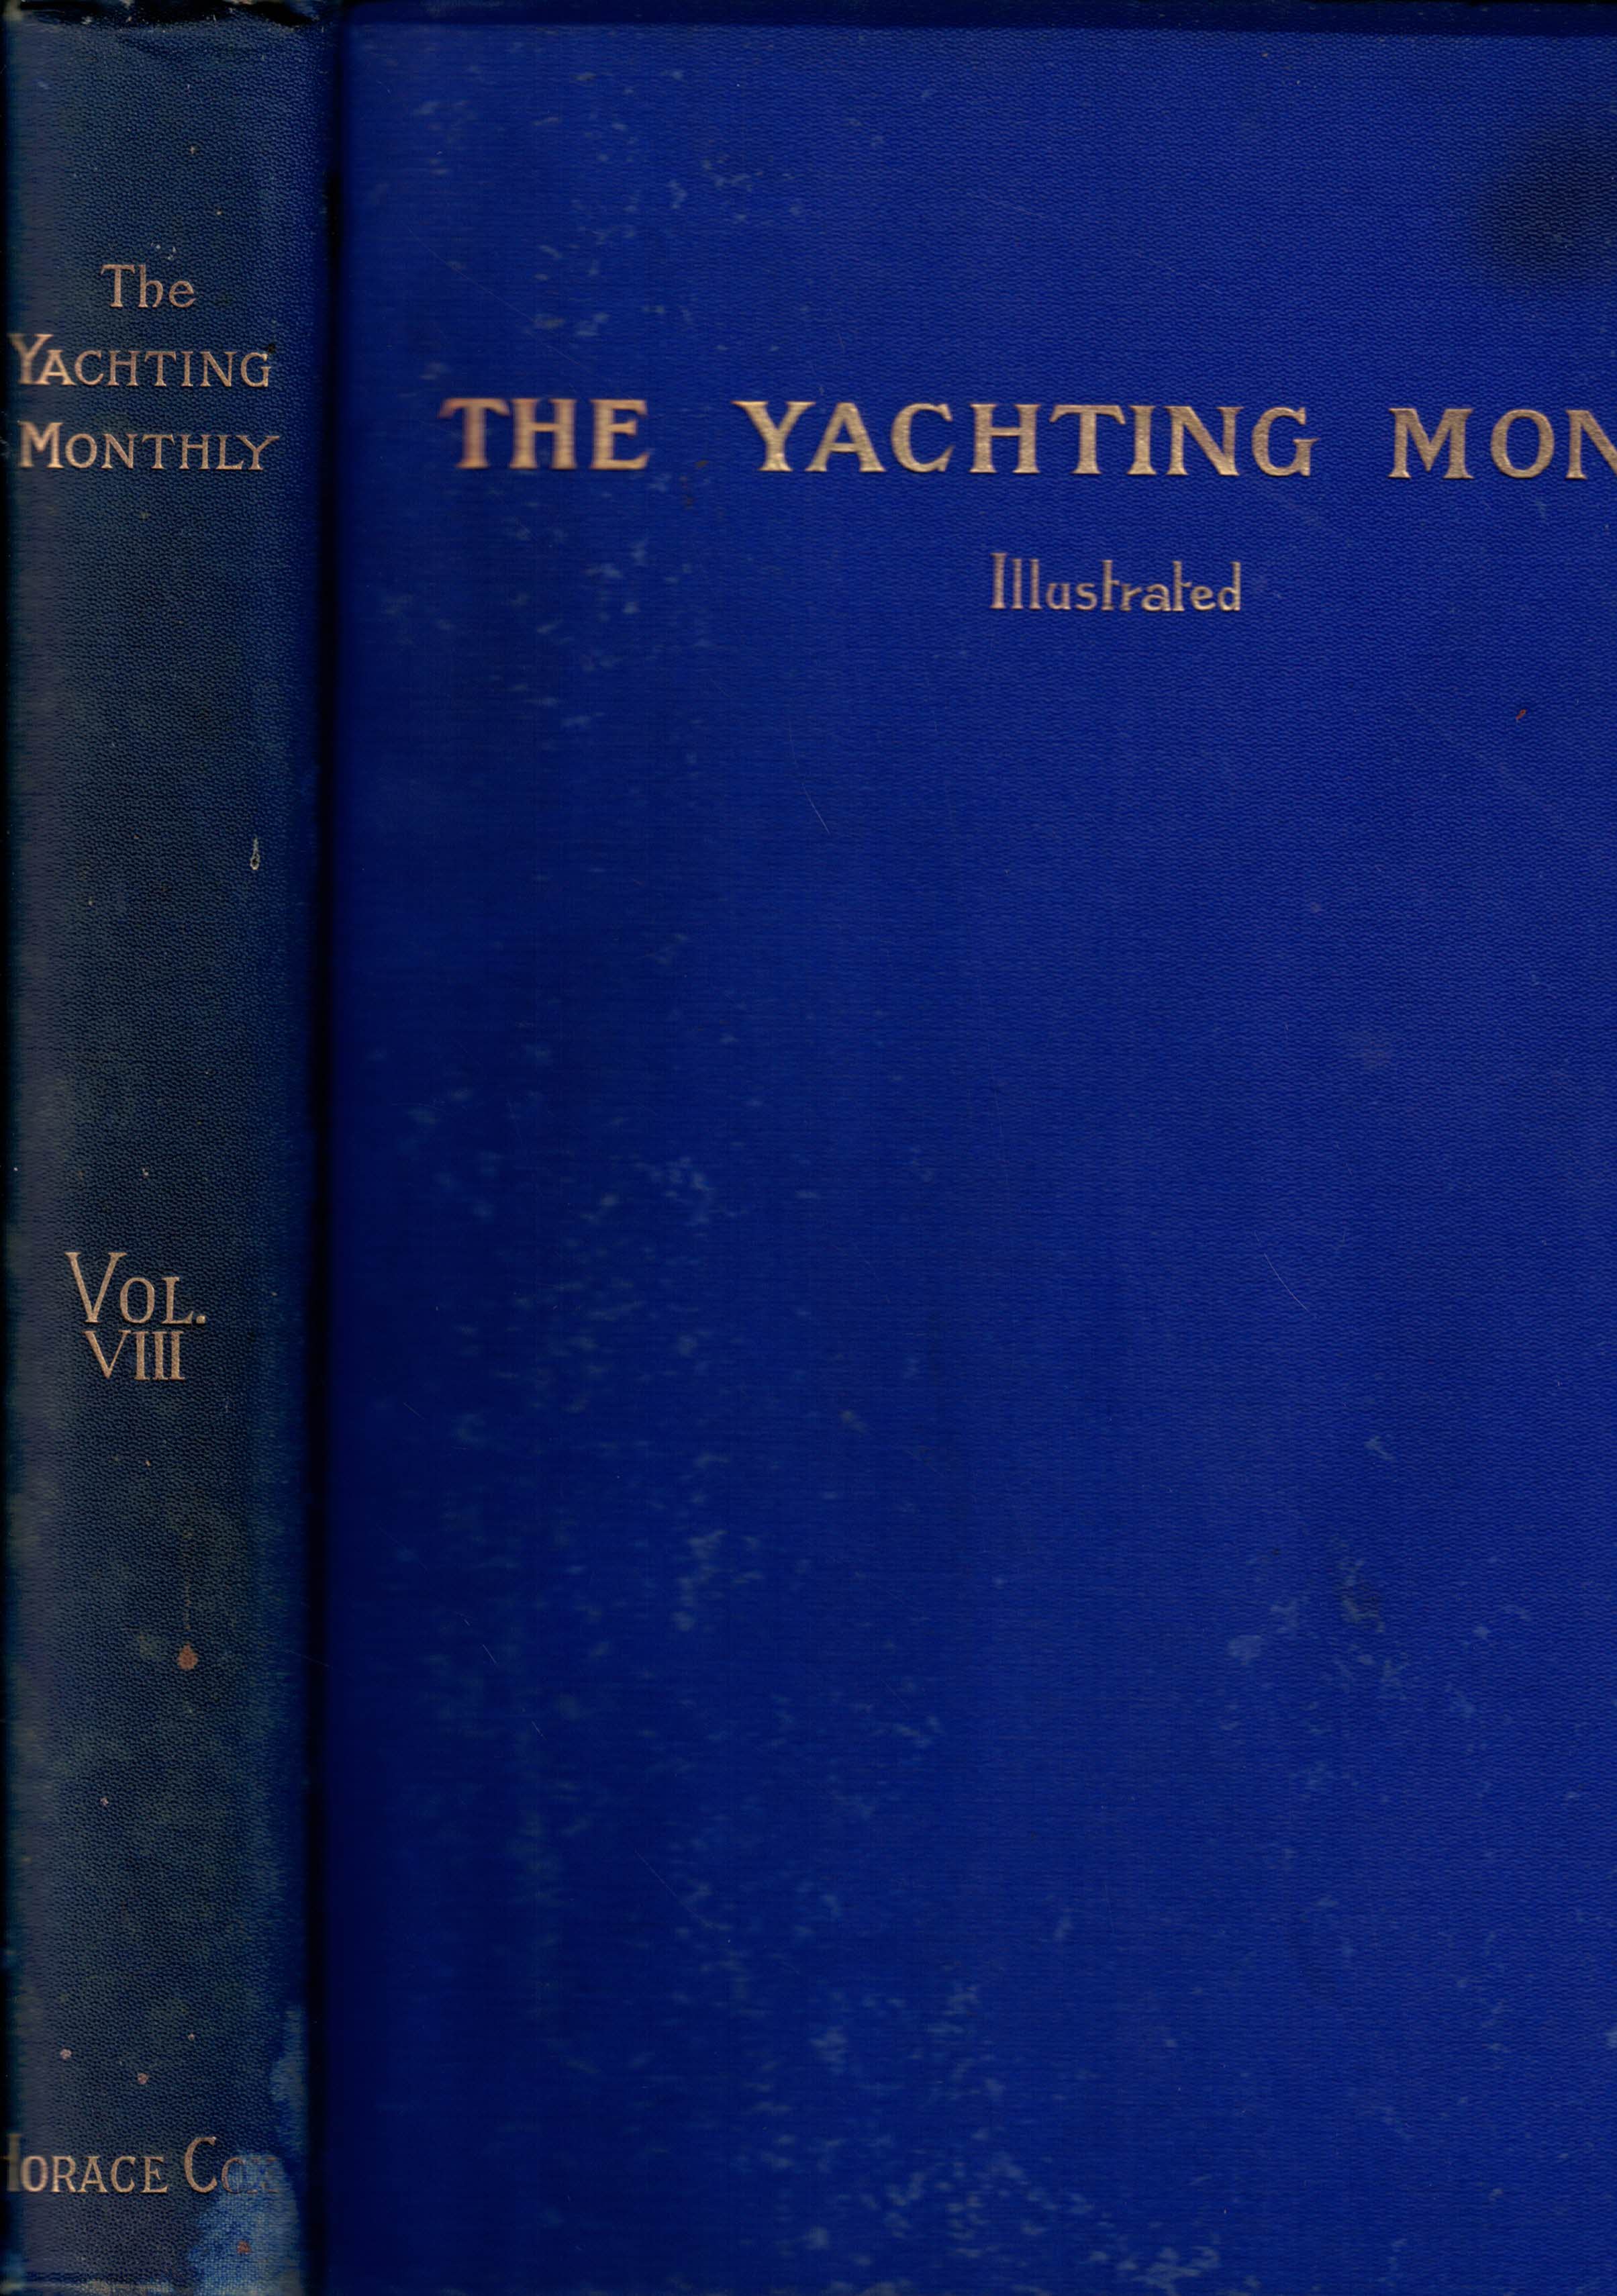 The Yachting and Boating Monthly. [Illustrated]. Volume VIII.- Nos. XLIII. to XLVIII. November 1909 - April 1910.